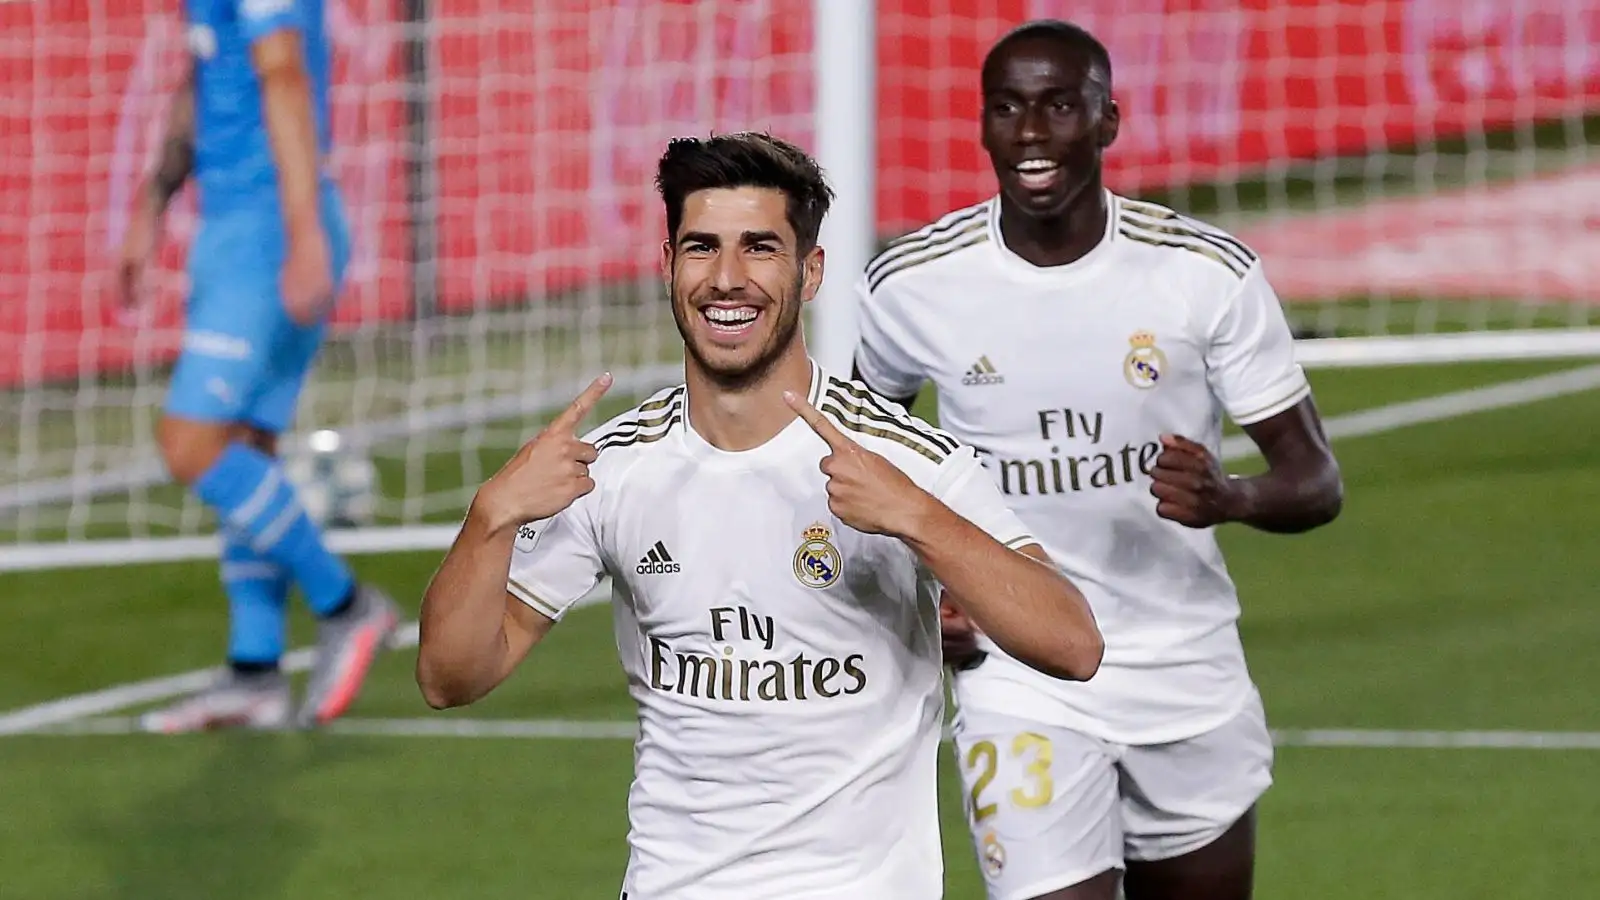 Reported Arsenal targets Marco Asensio and Ferland Mendy celebrate a goal